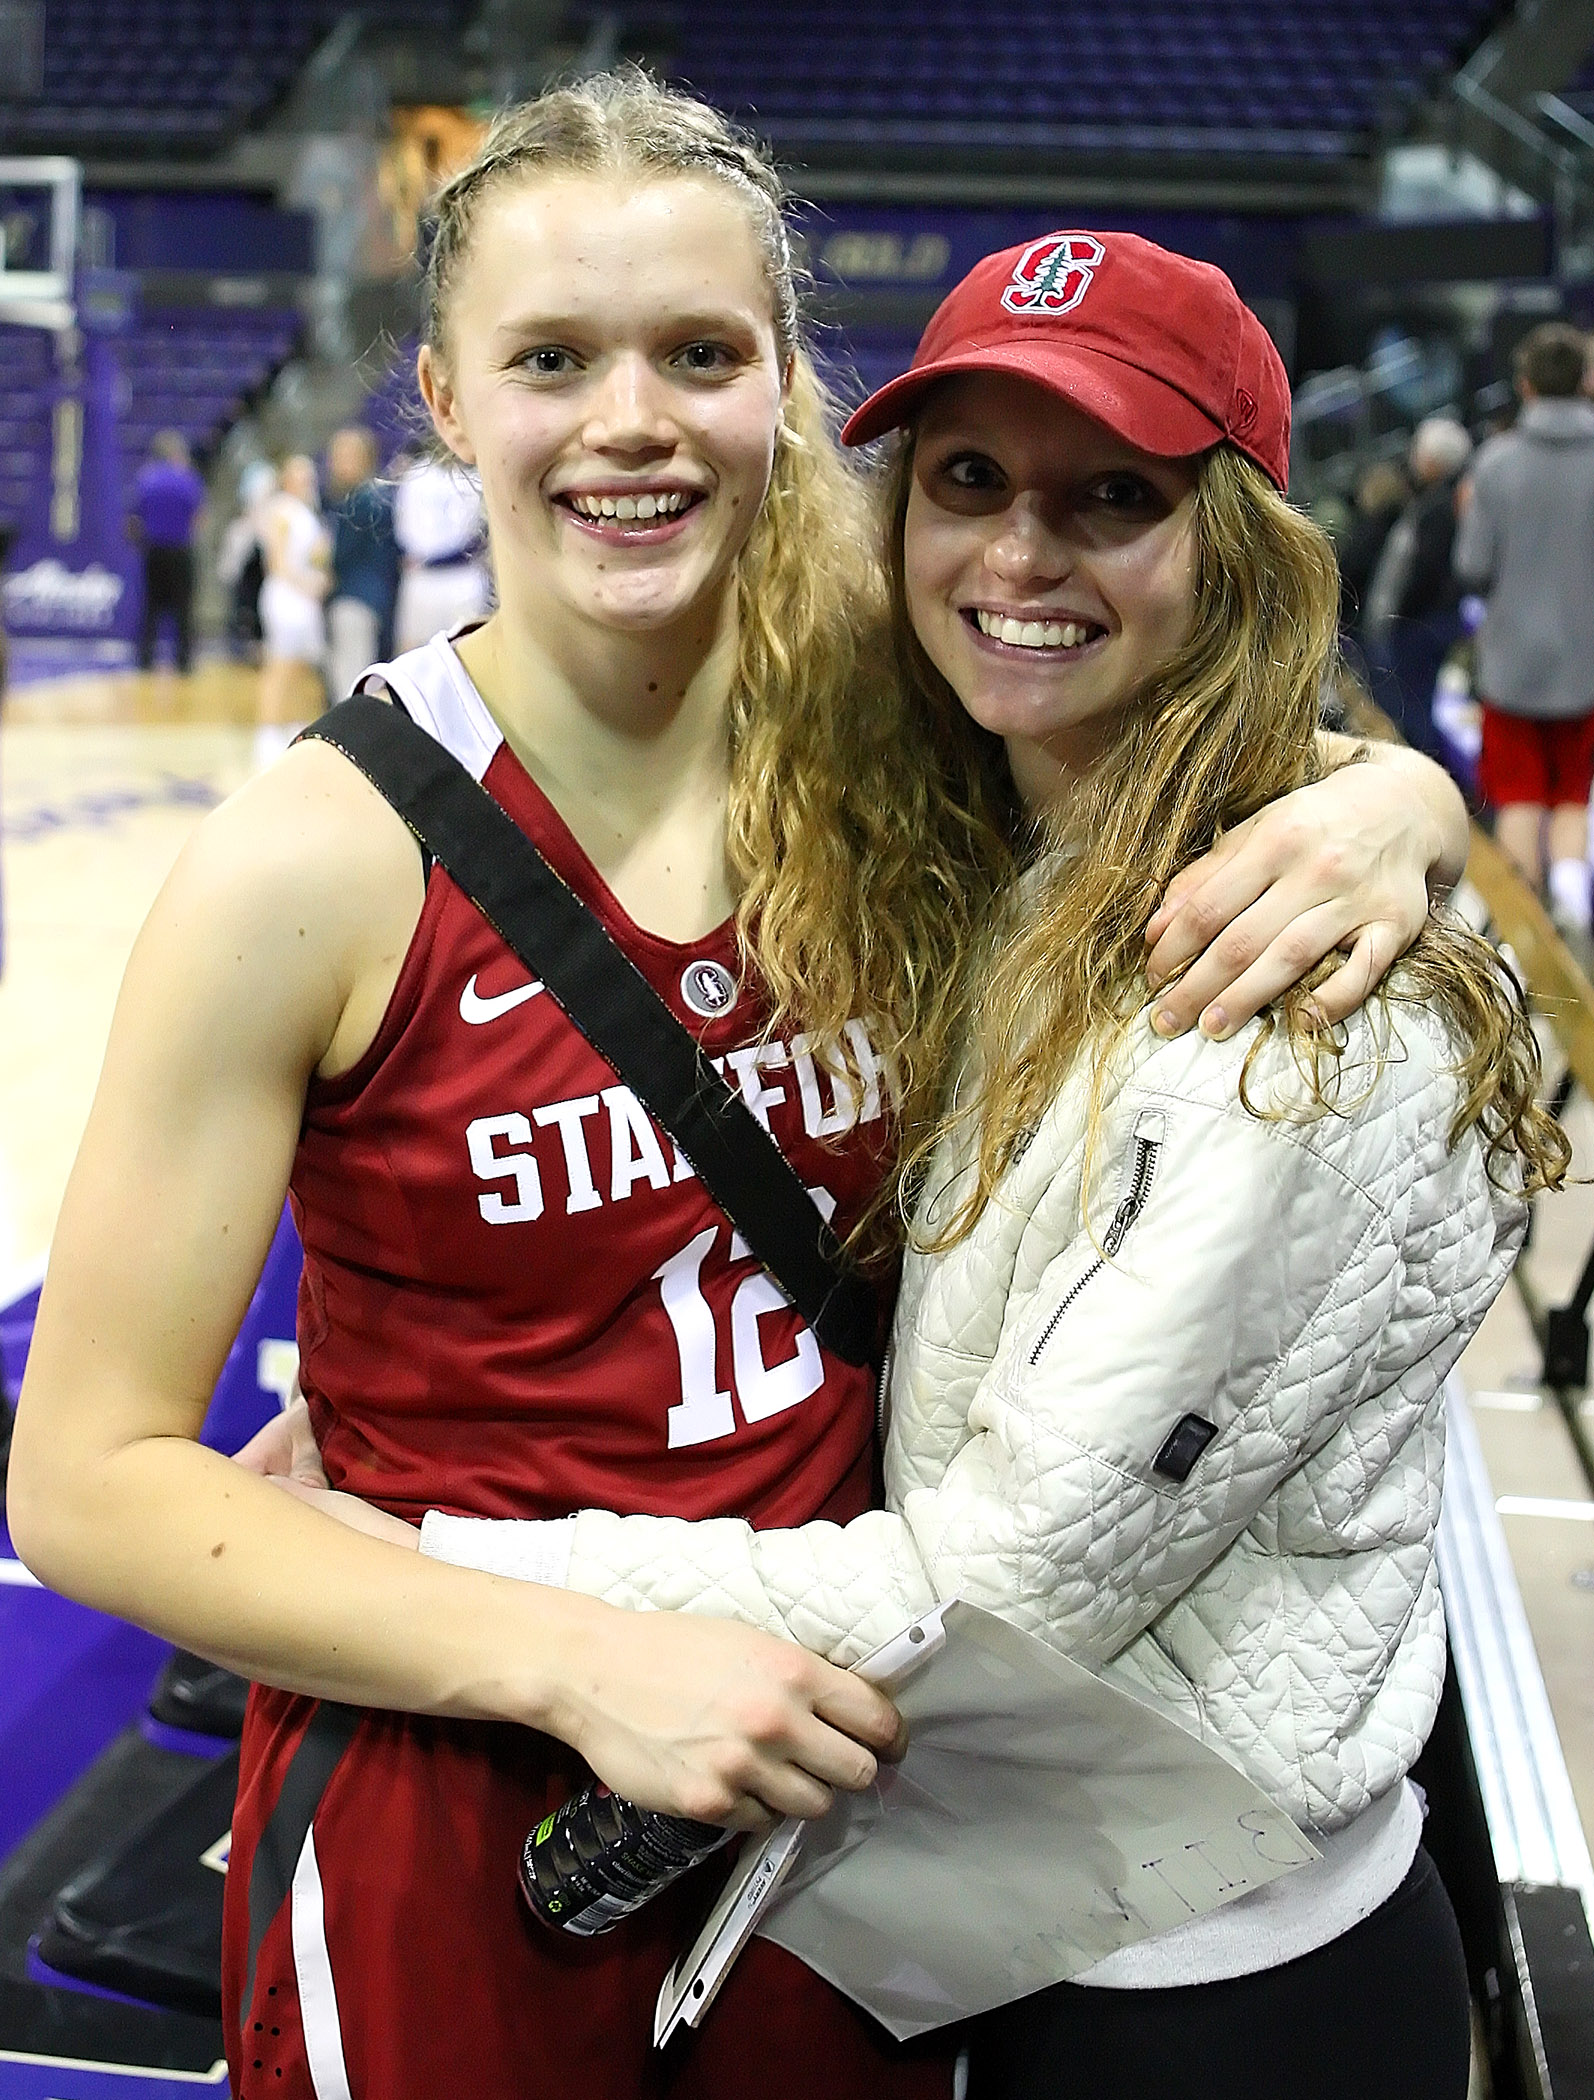 After the game twin sisters Brittany McPhee of Stanford and Jordan McPhee of Seattle Pacific University pose for a photo.